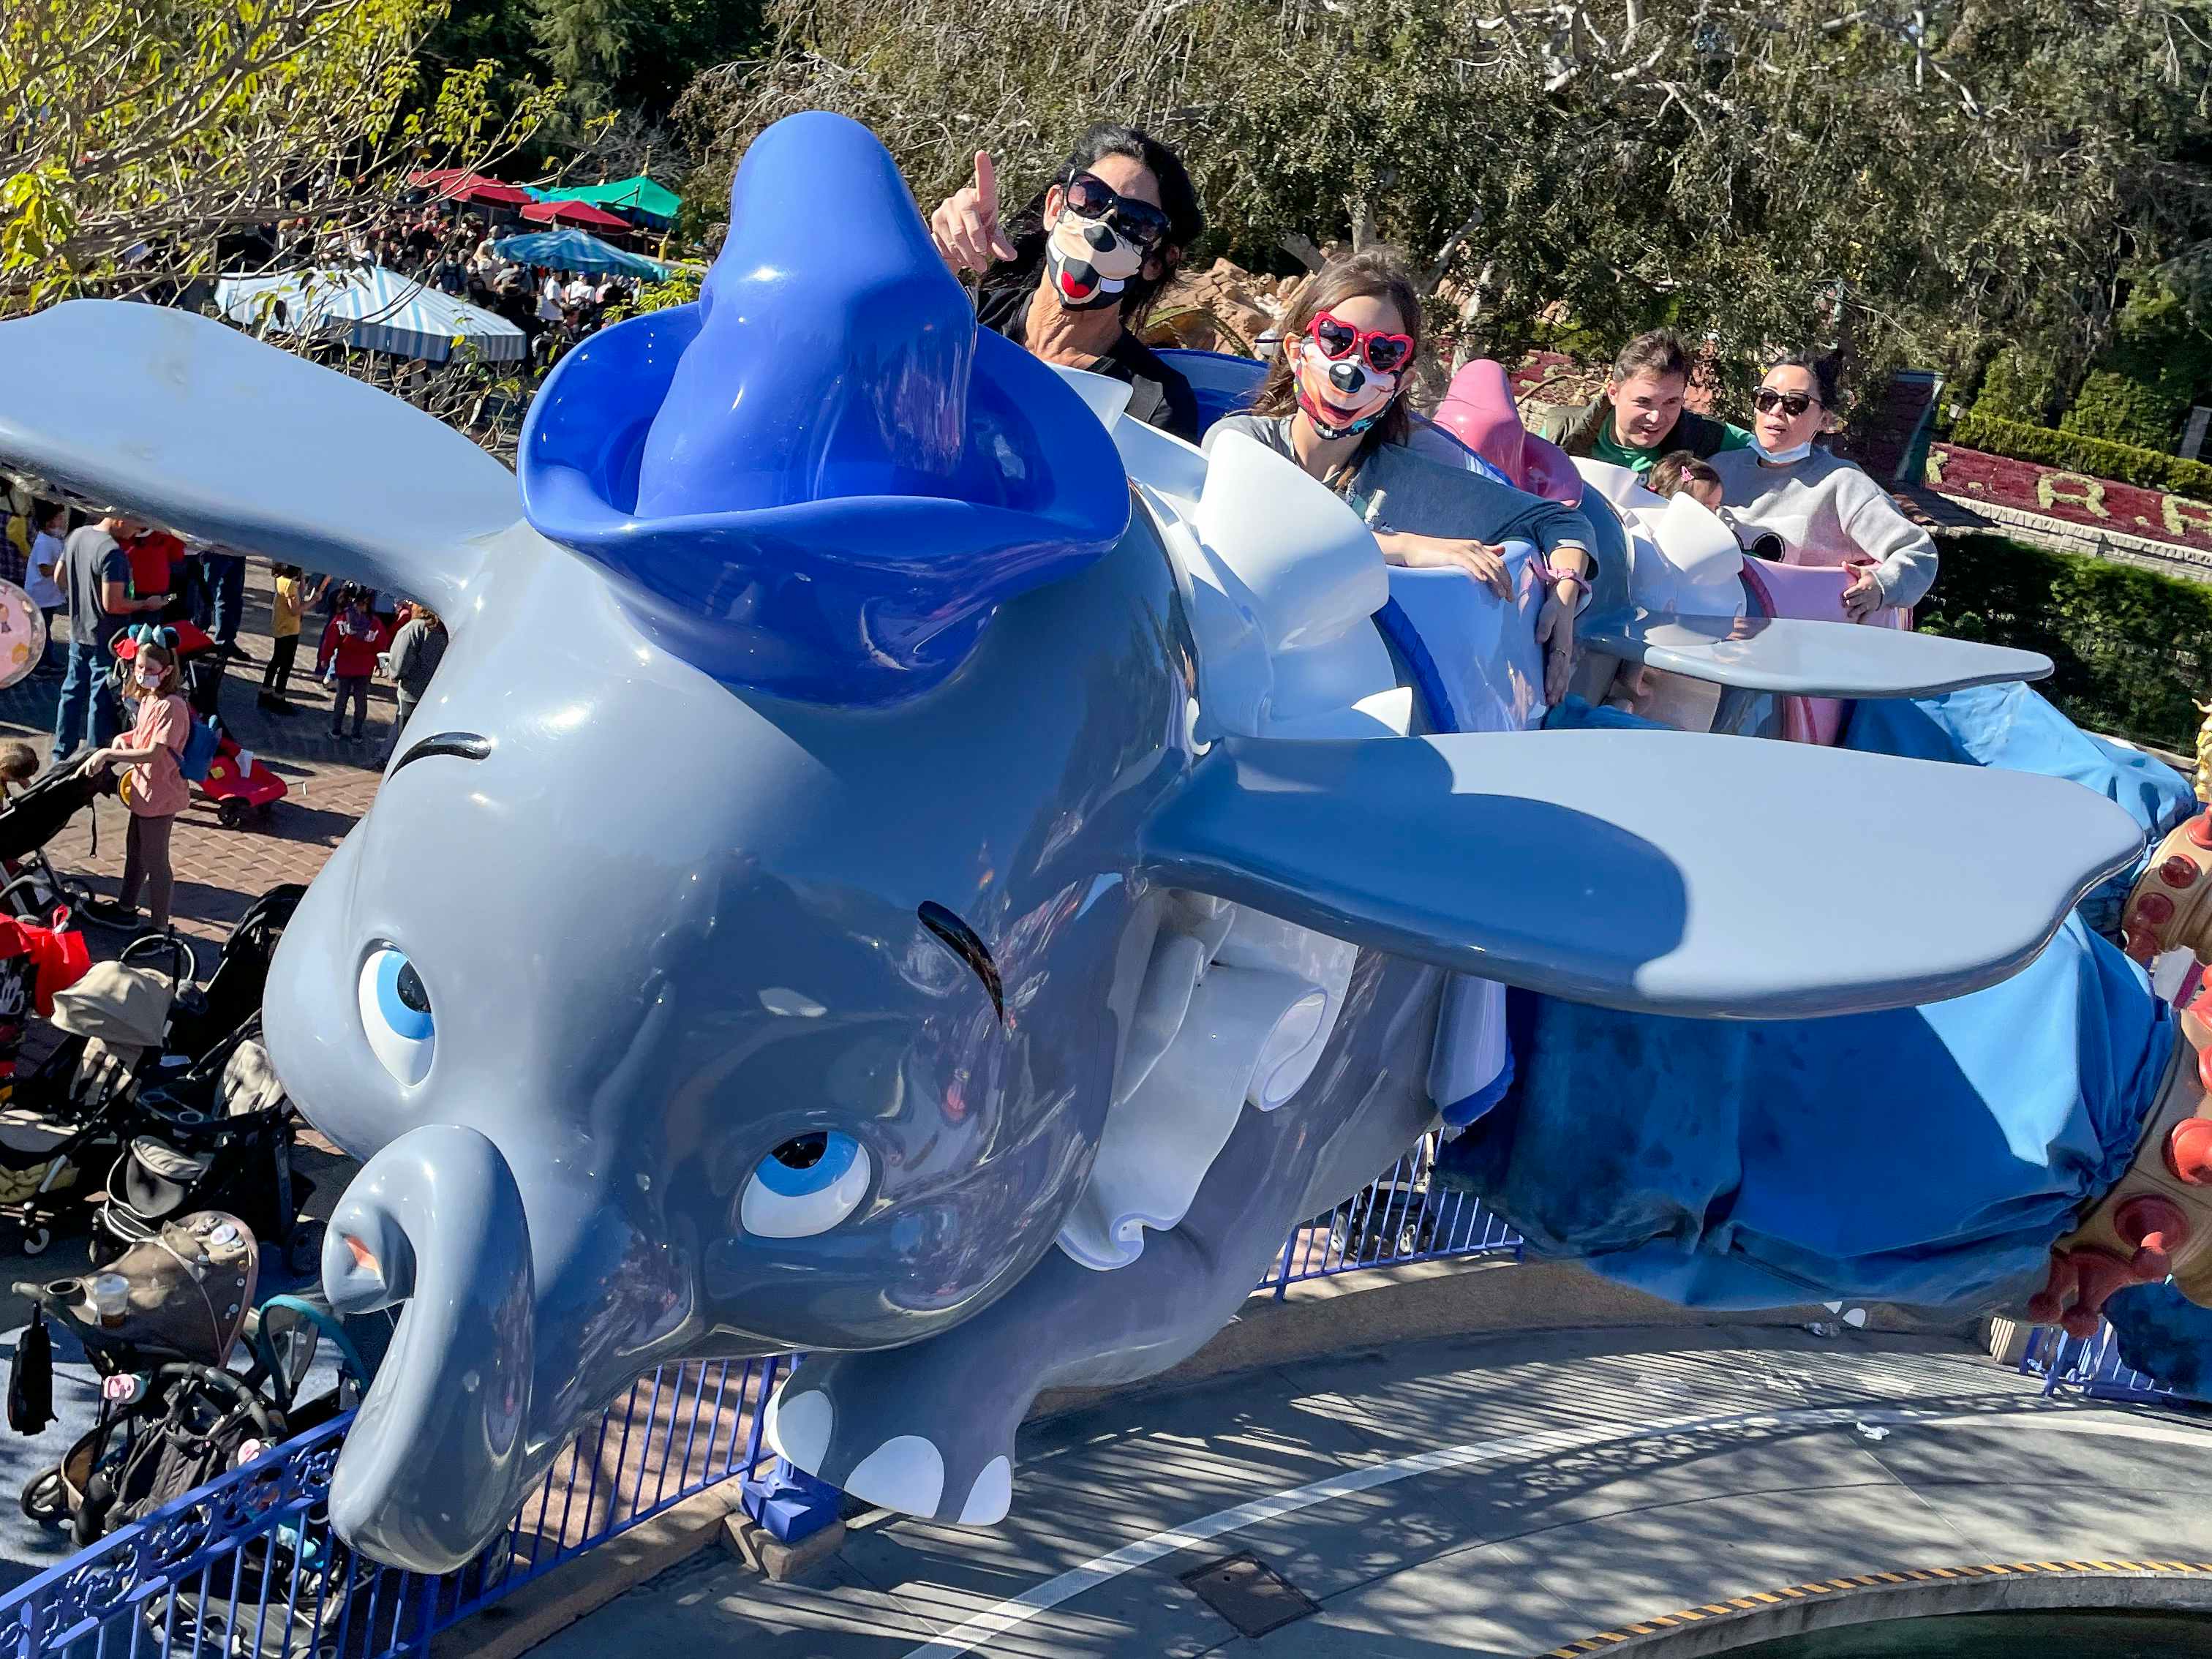 People riding on a Dumbo ride at Disneyland in California